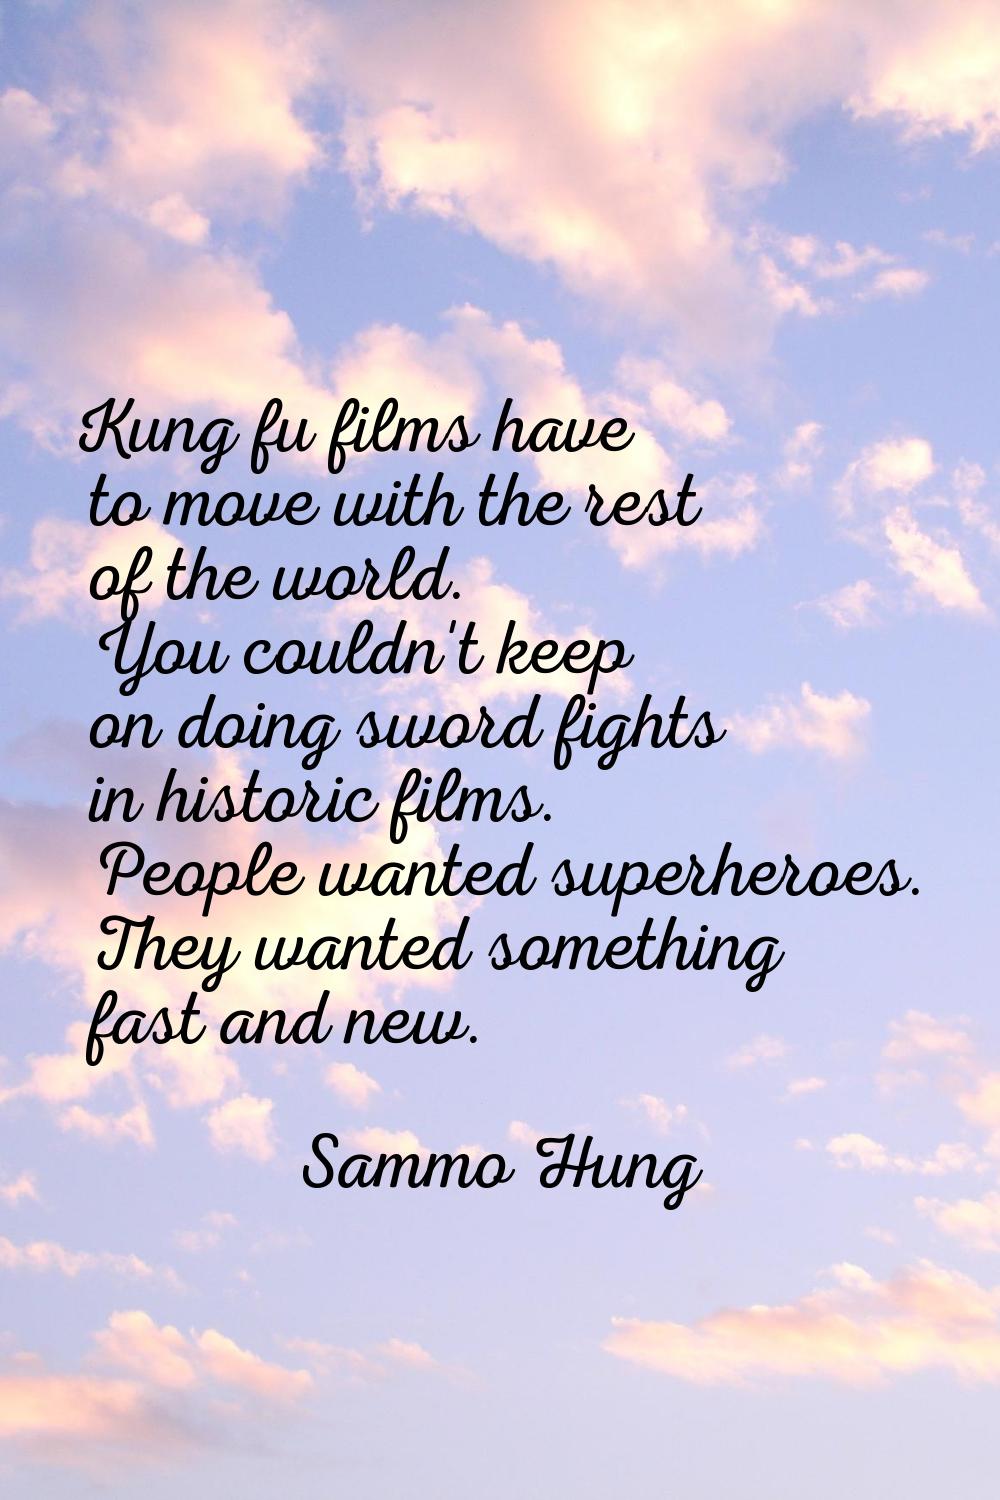 Kung fu films have to move with the rest of the world. You couldn't keep on doing sword fights in h